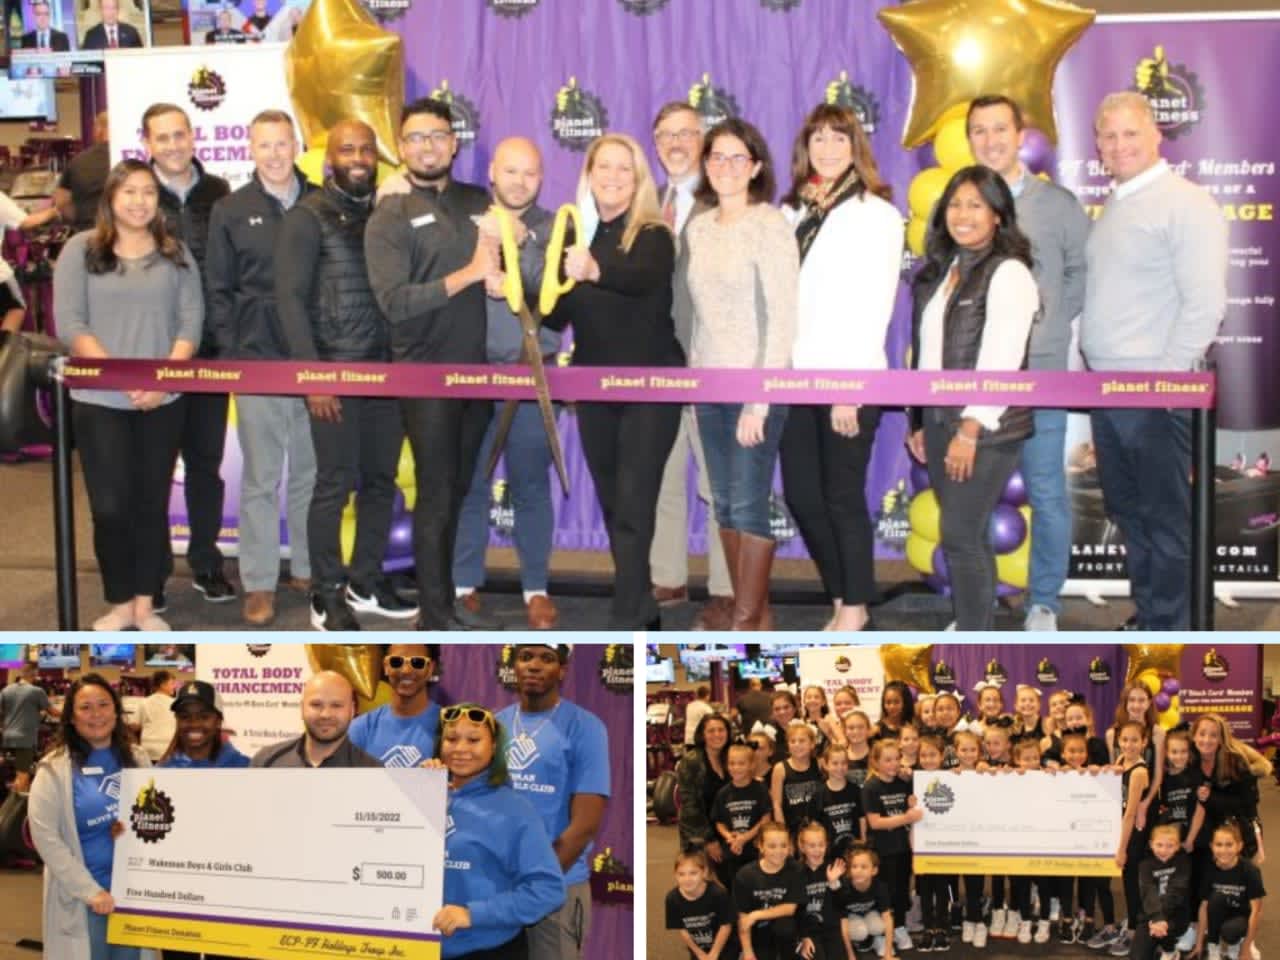 Planet Fitness officials, local state representatives, and Fairfield Cheerleaders celebrate the opening of the new Planet Fitness in Fairfield.